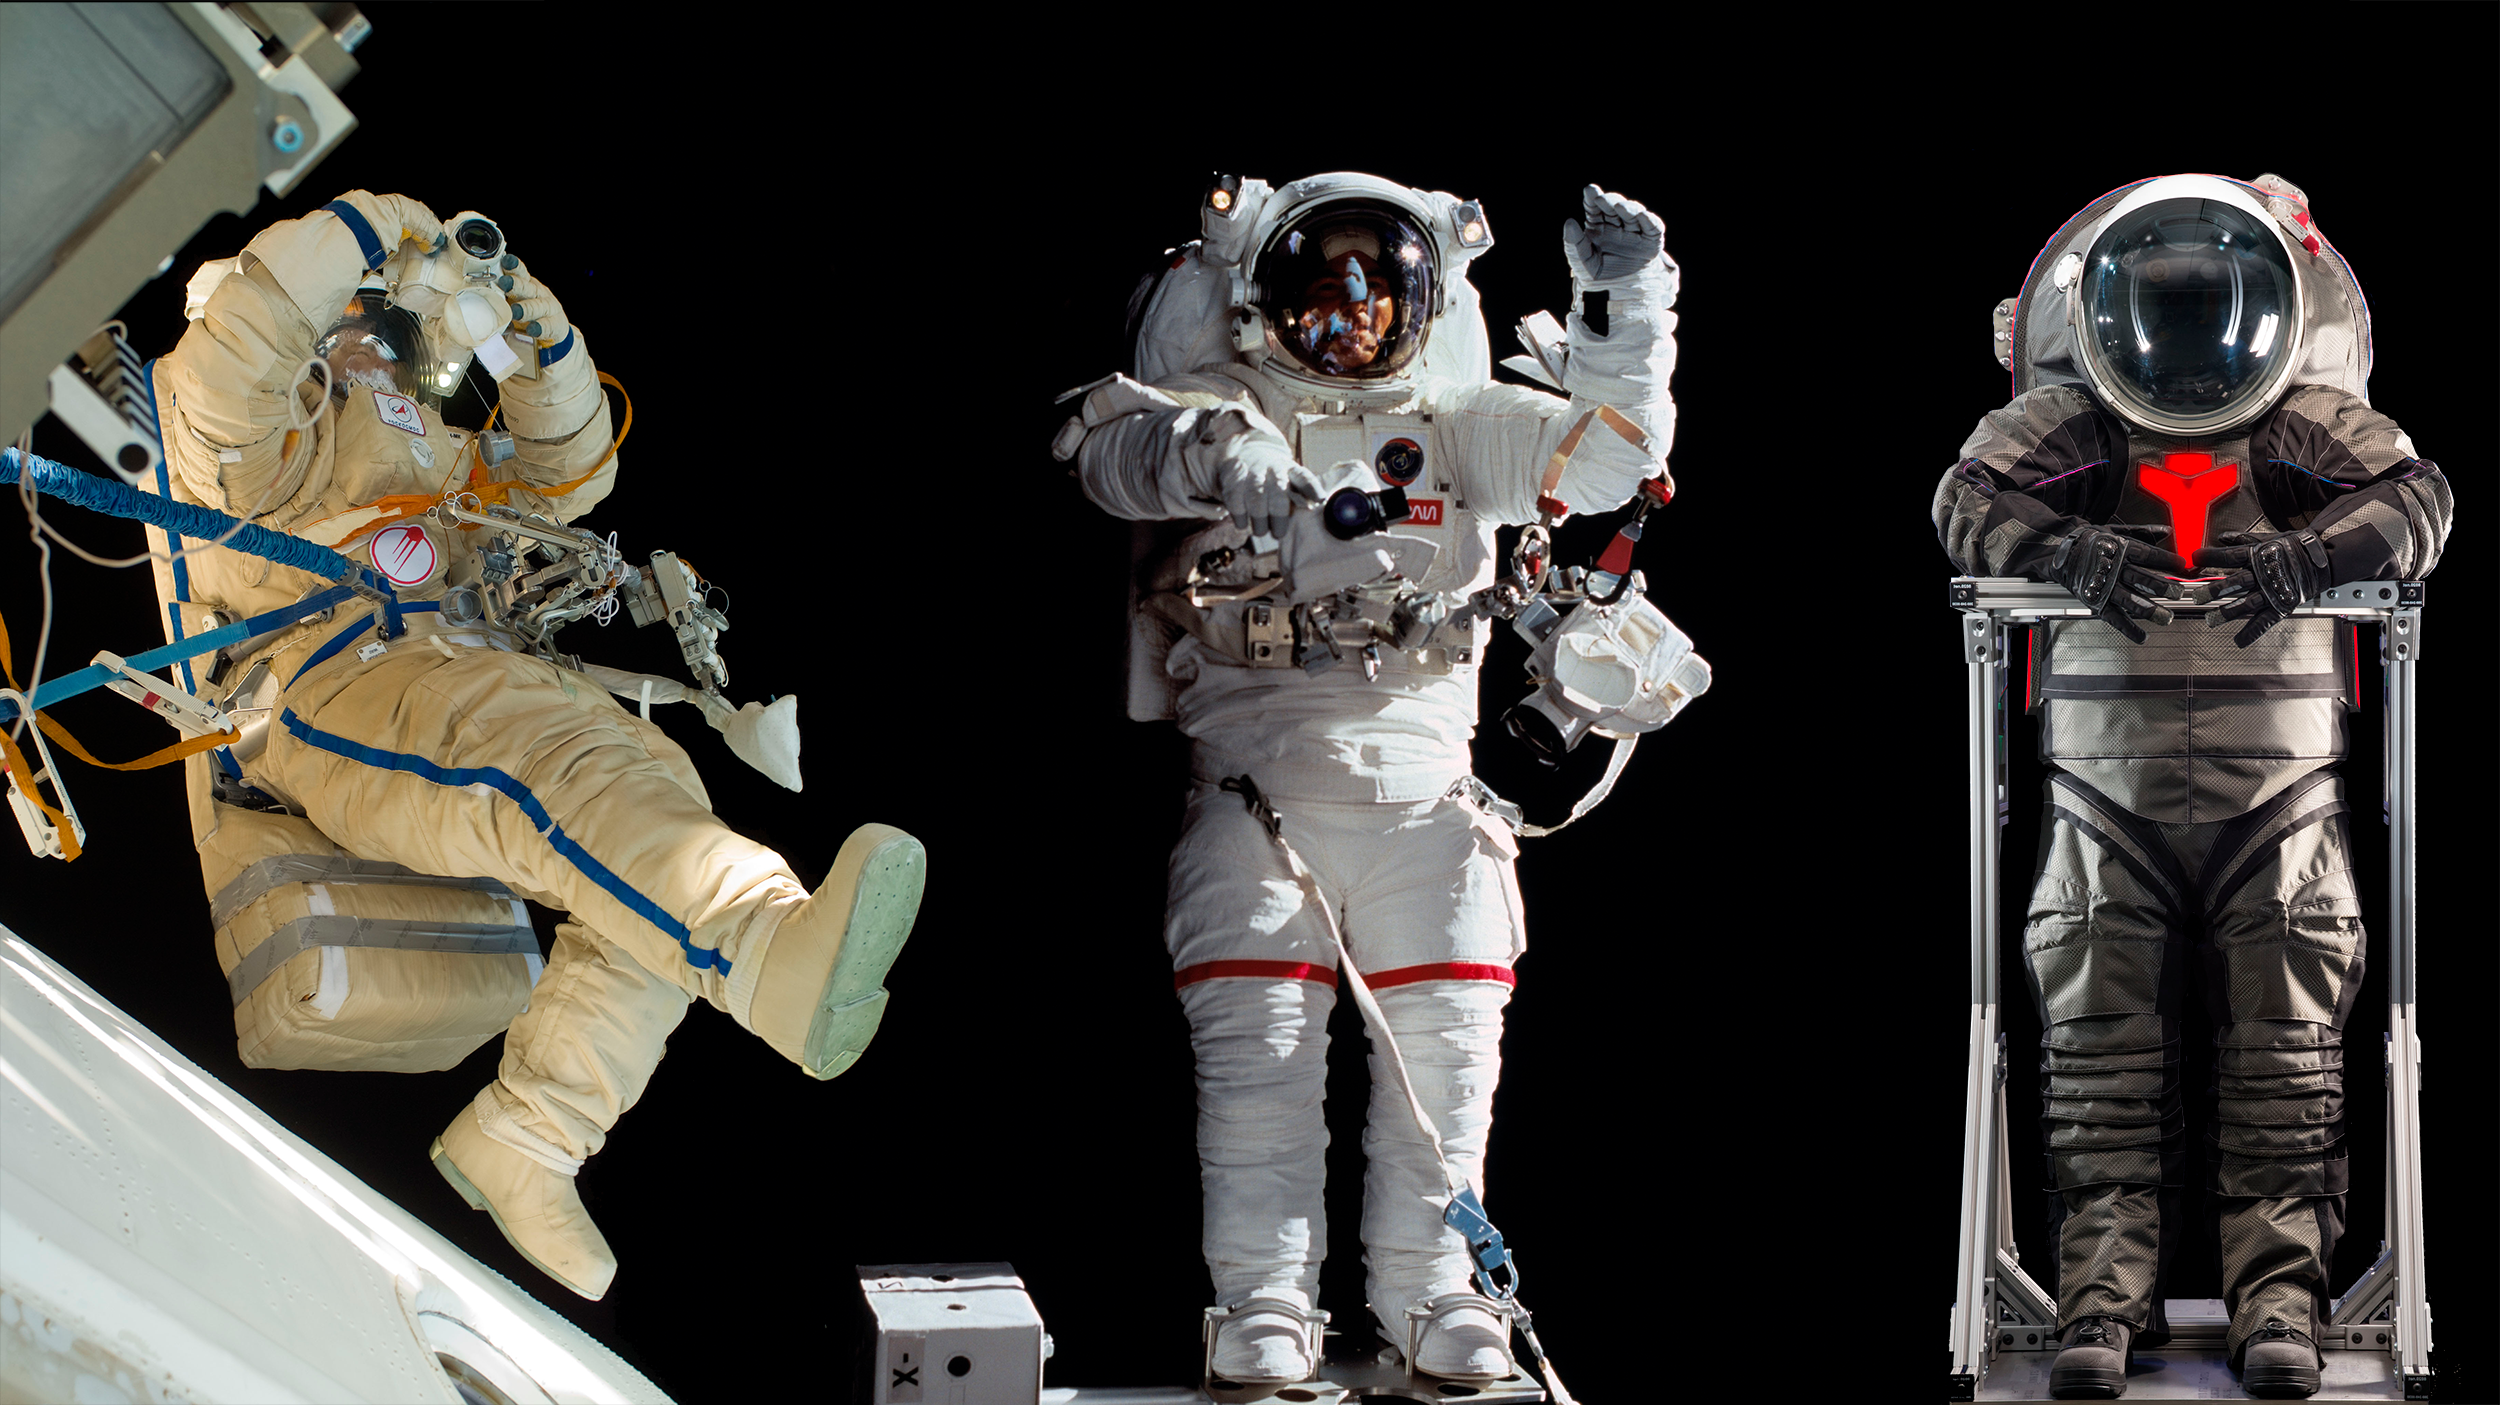 Why do we need spacesuits? 